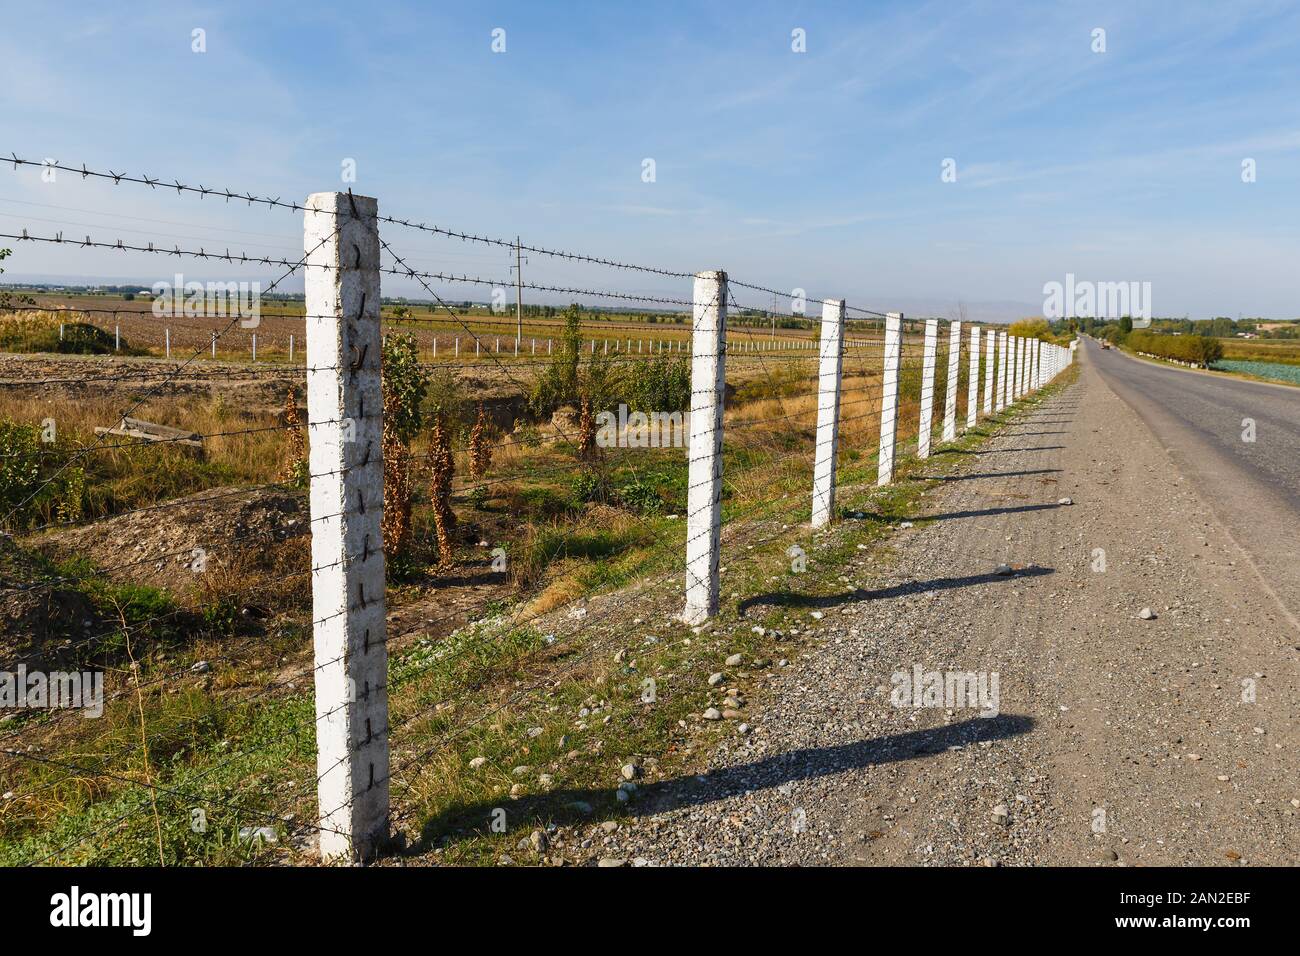 Detail Image Of Barbed Wire Fence Nomer 29